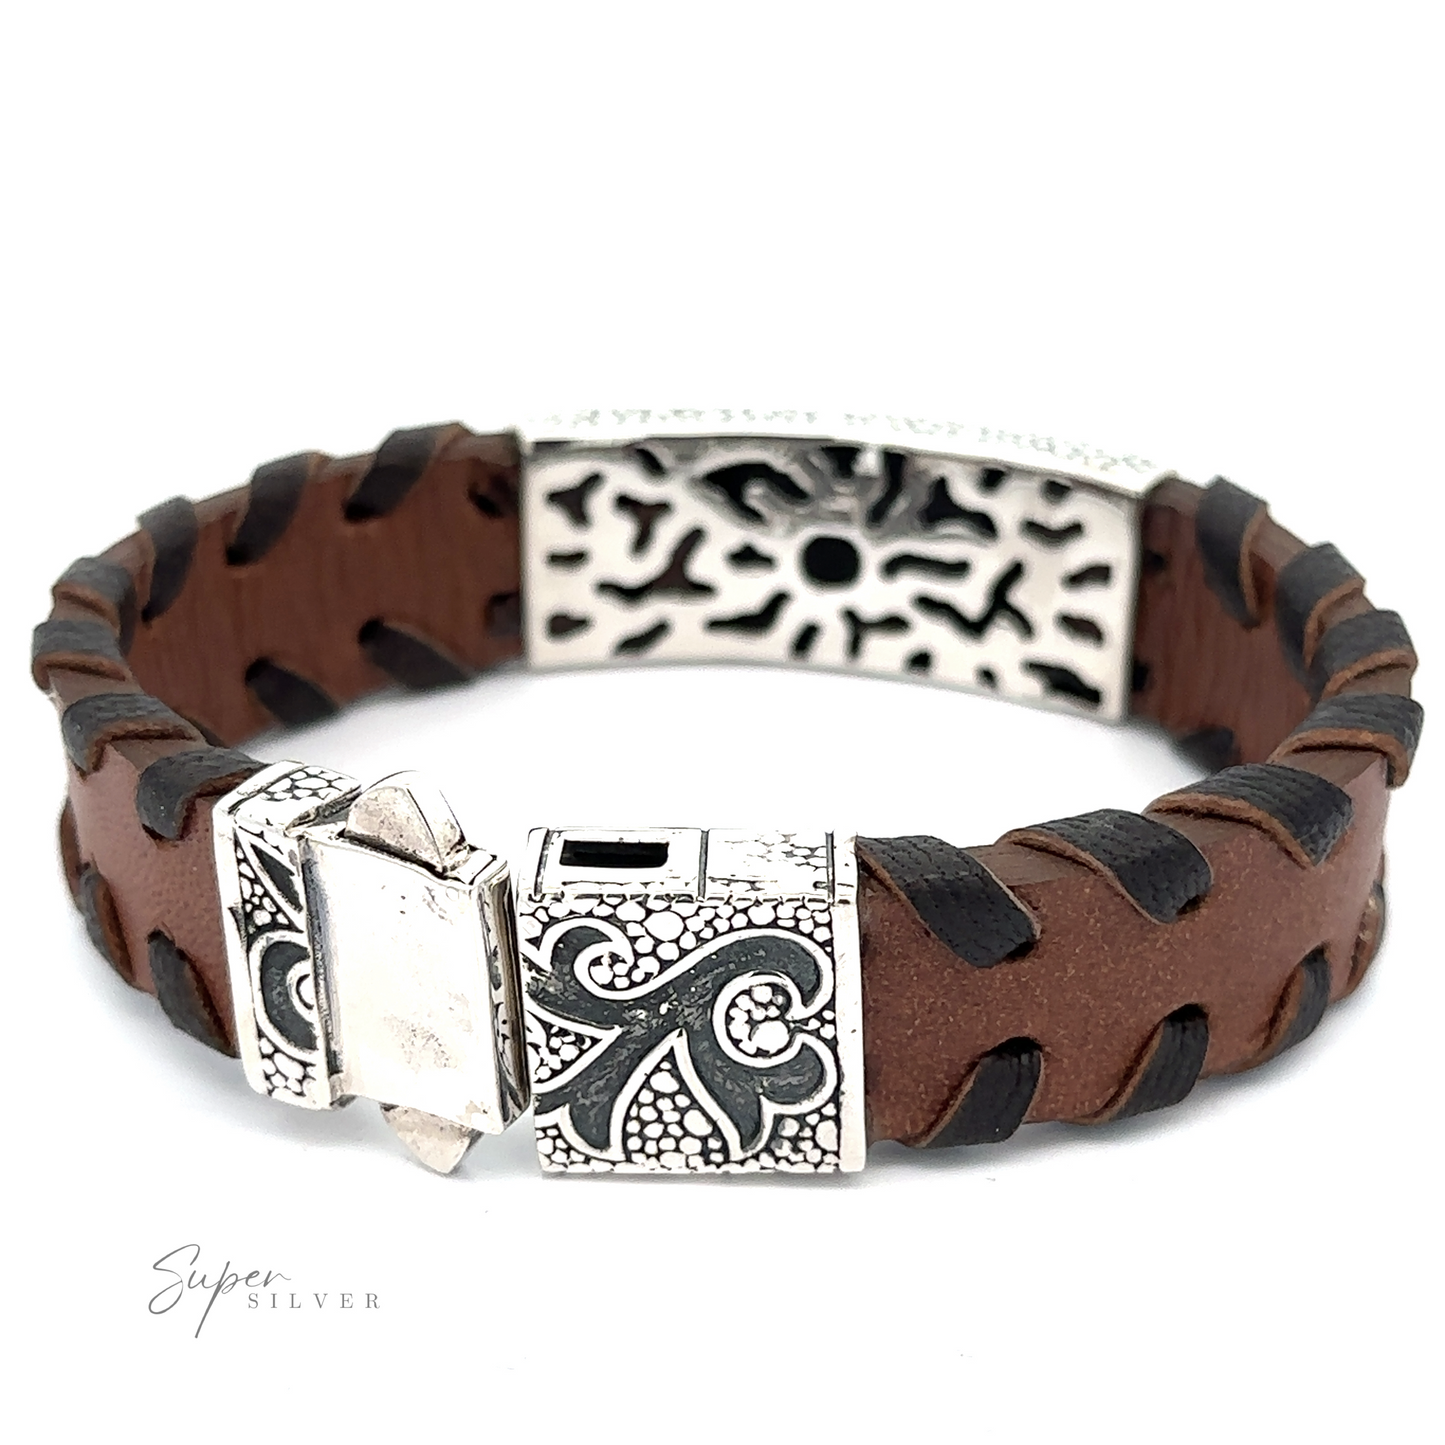 
                  
                    A Tribal Leather Bracelet with a brown leather strap, featuring a tribal silver center and decorative clasp with intricate designs. The brand name "Super Silver" is visible on the clasp.
                  
                